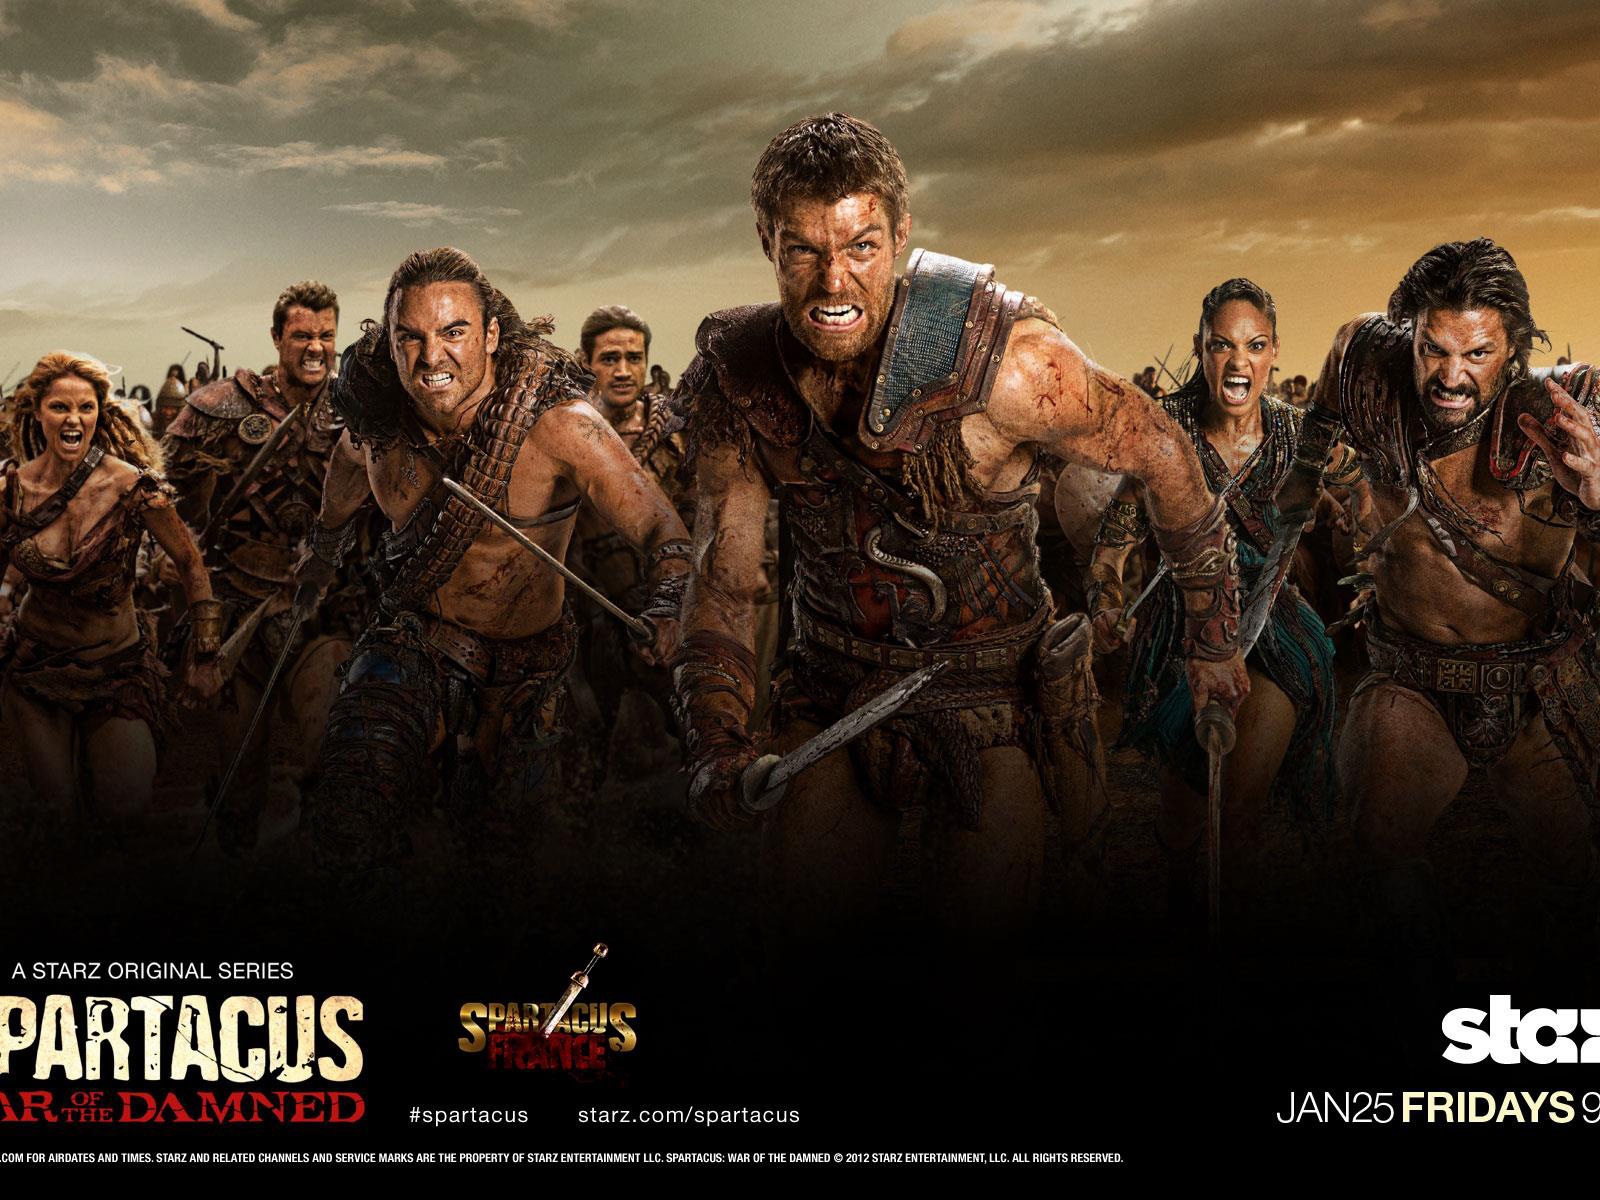 Spartacus: War of the Damned HD wallpapers #1 - 1600x1200